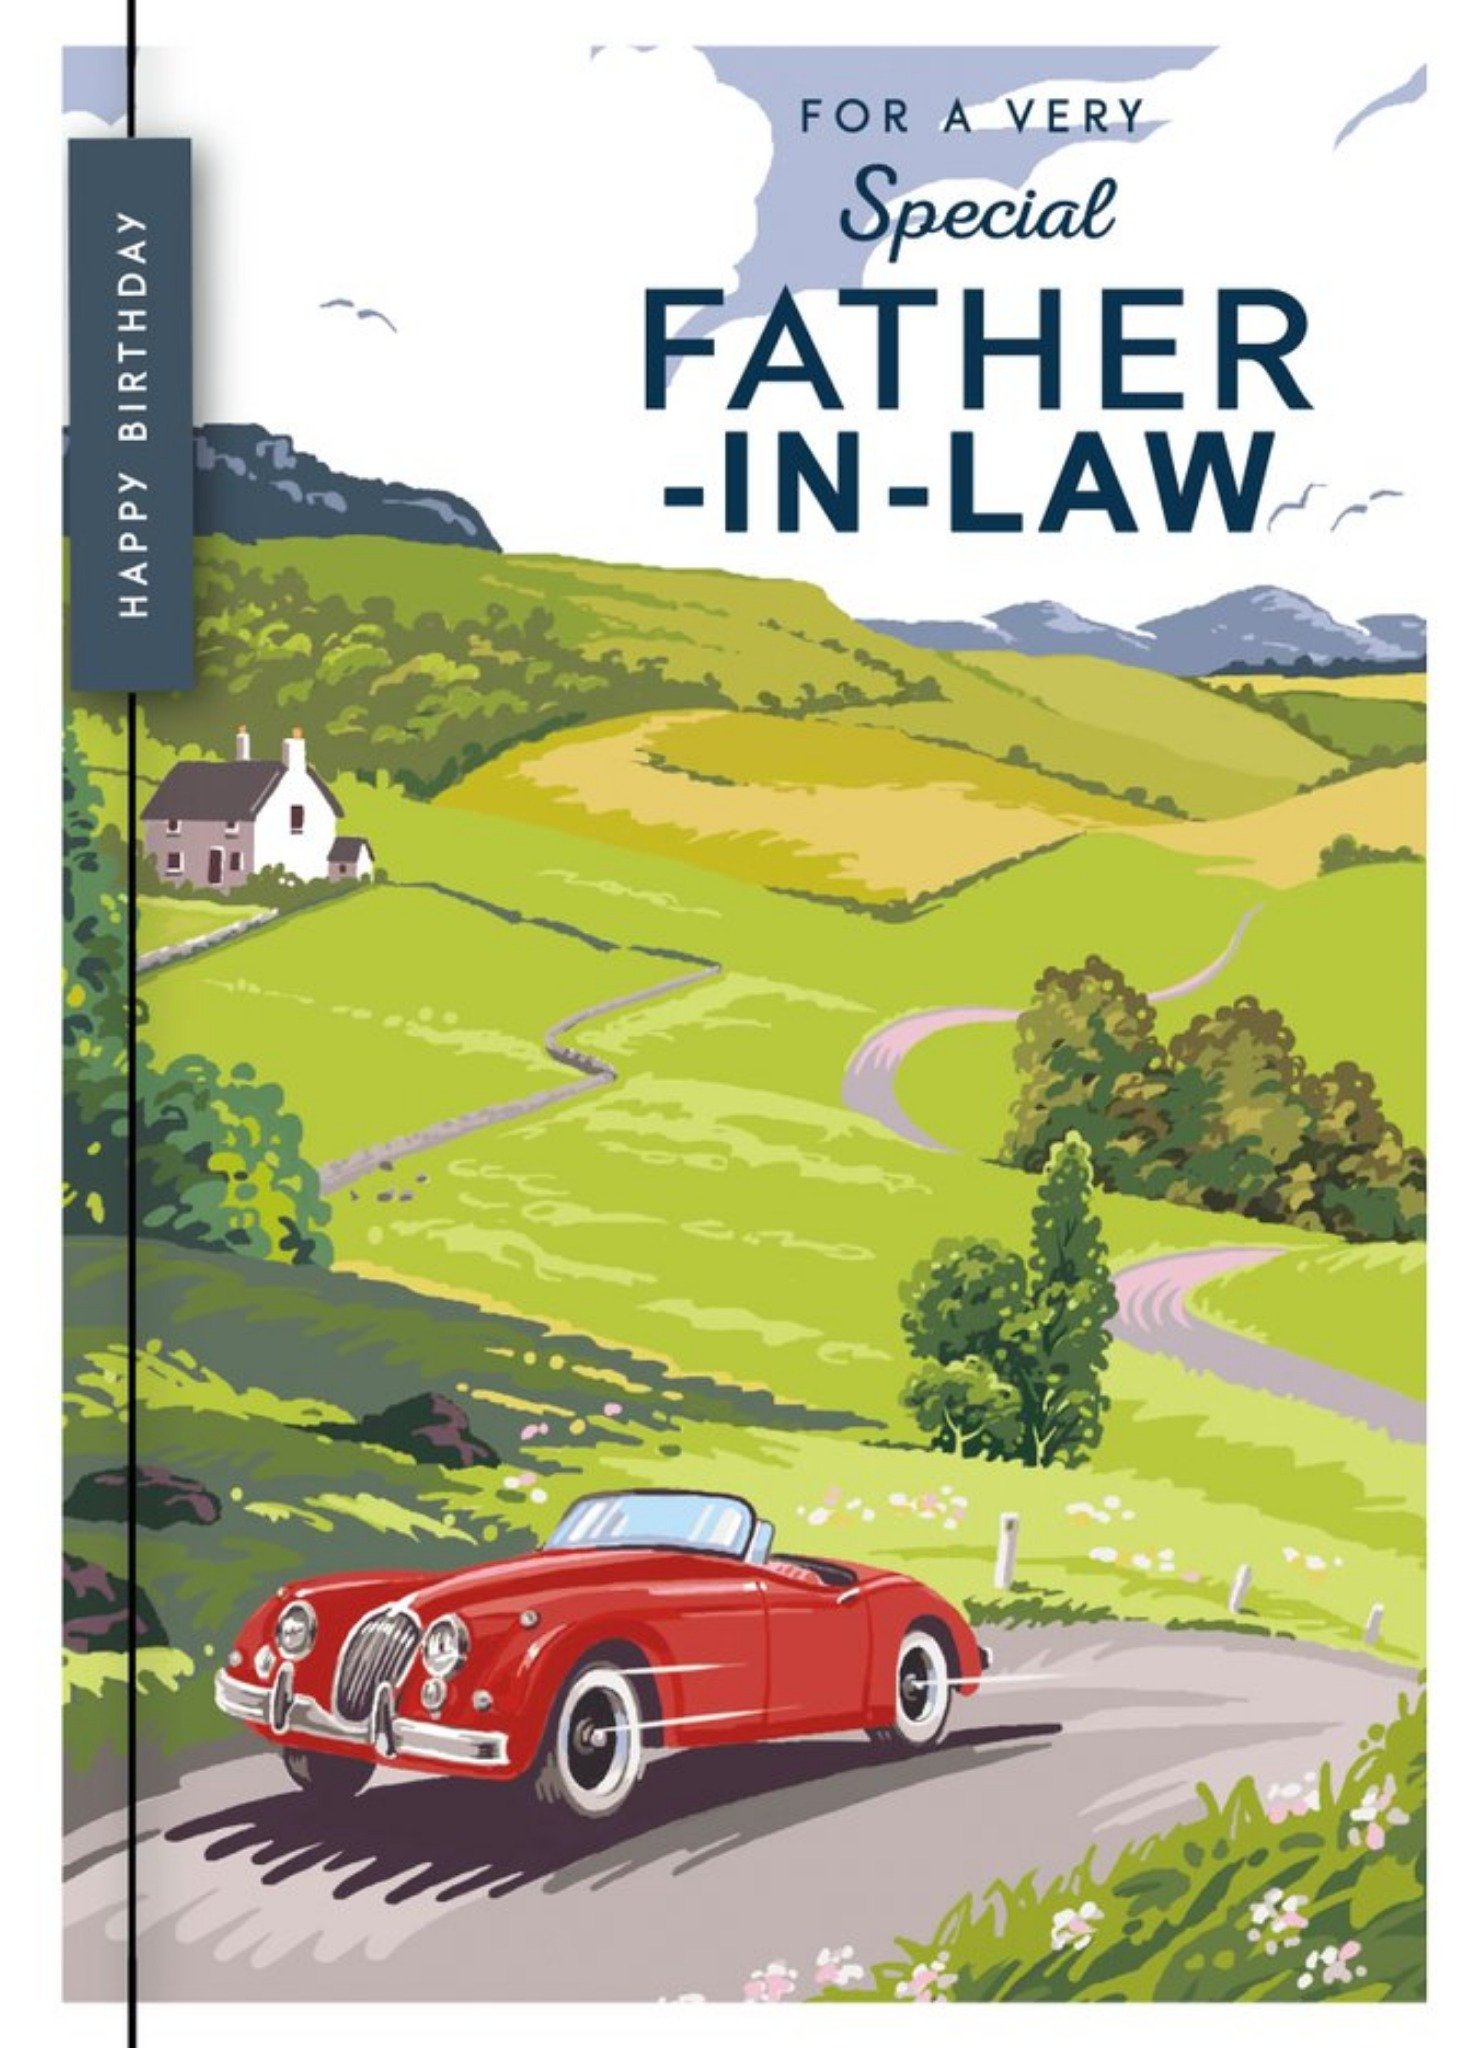 Moonpig Uk Greetings Carlton Cards Sports Car Birthday Father In Law Travel Card, Large